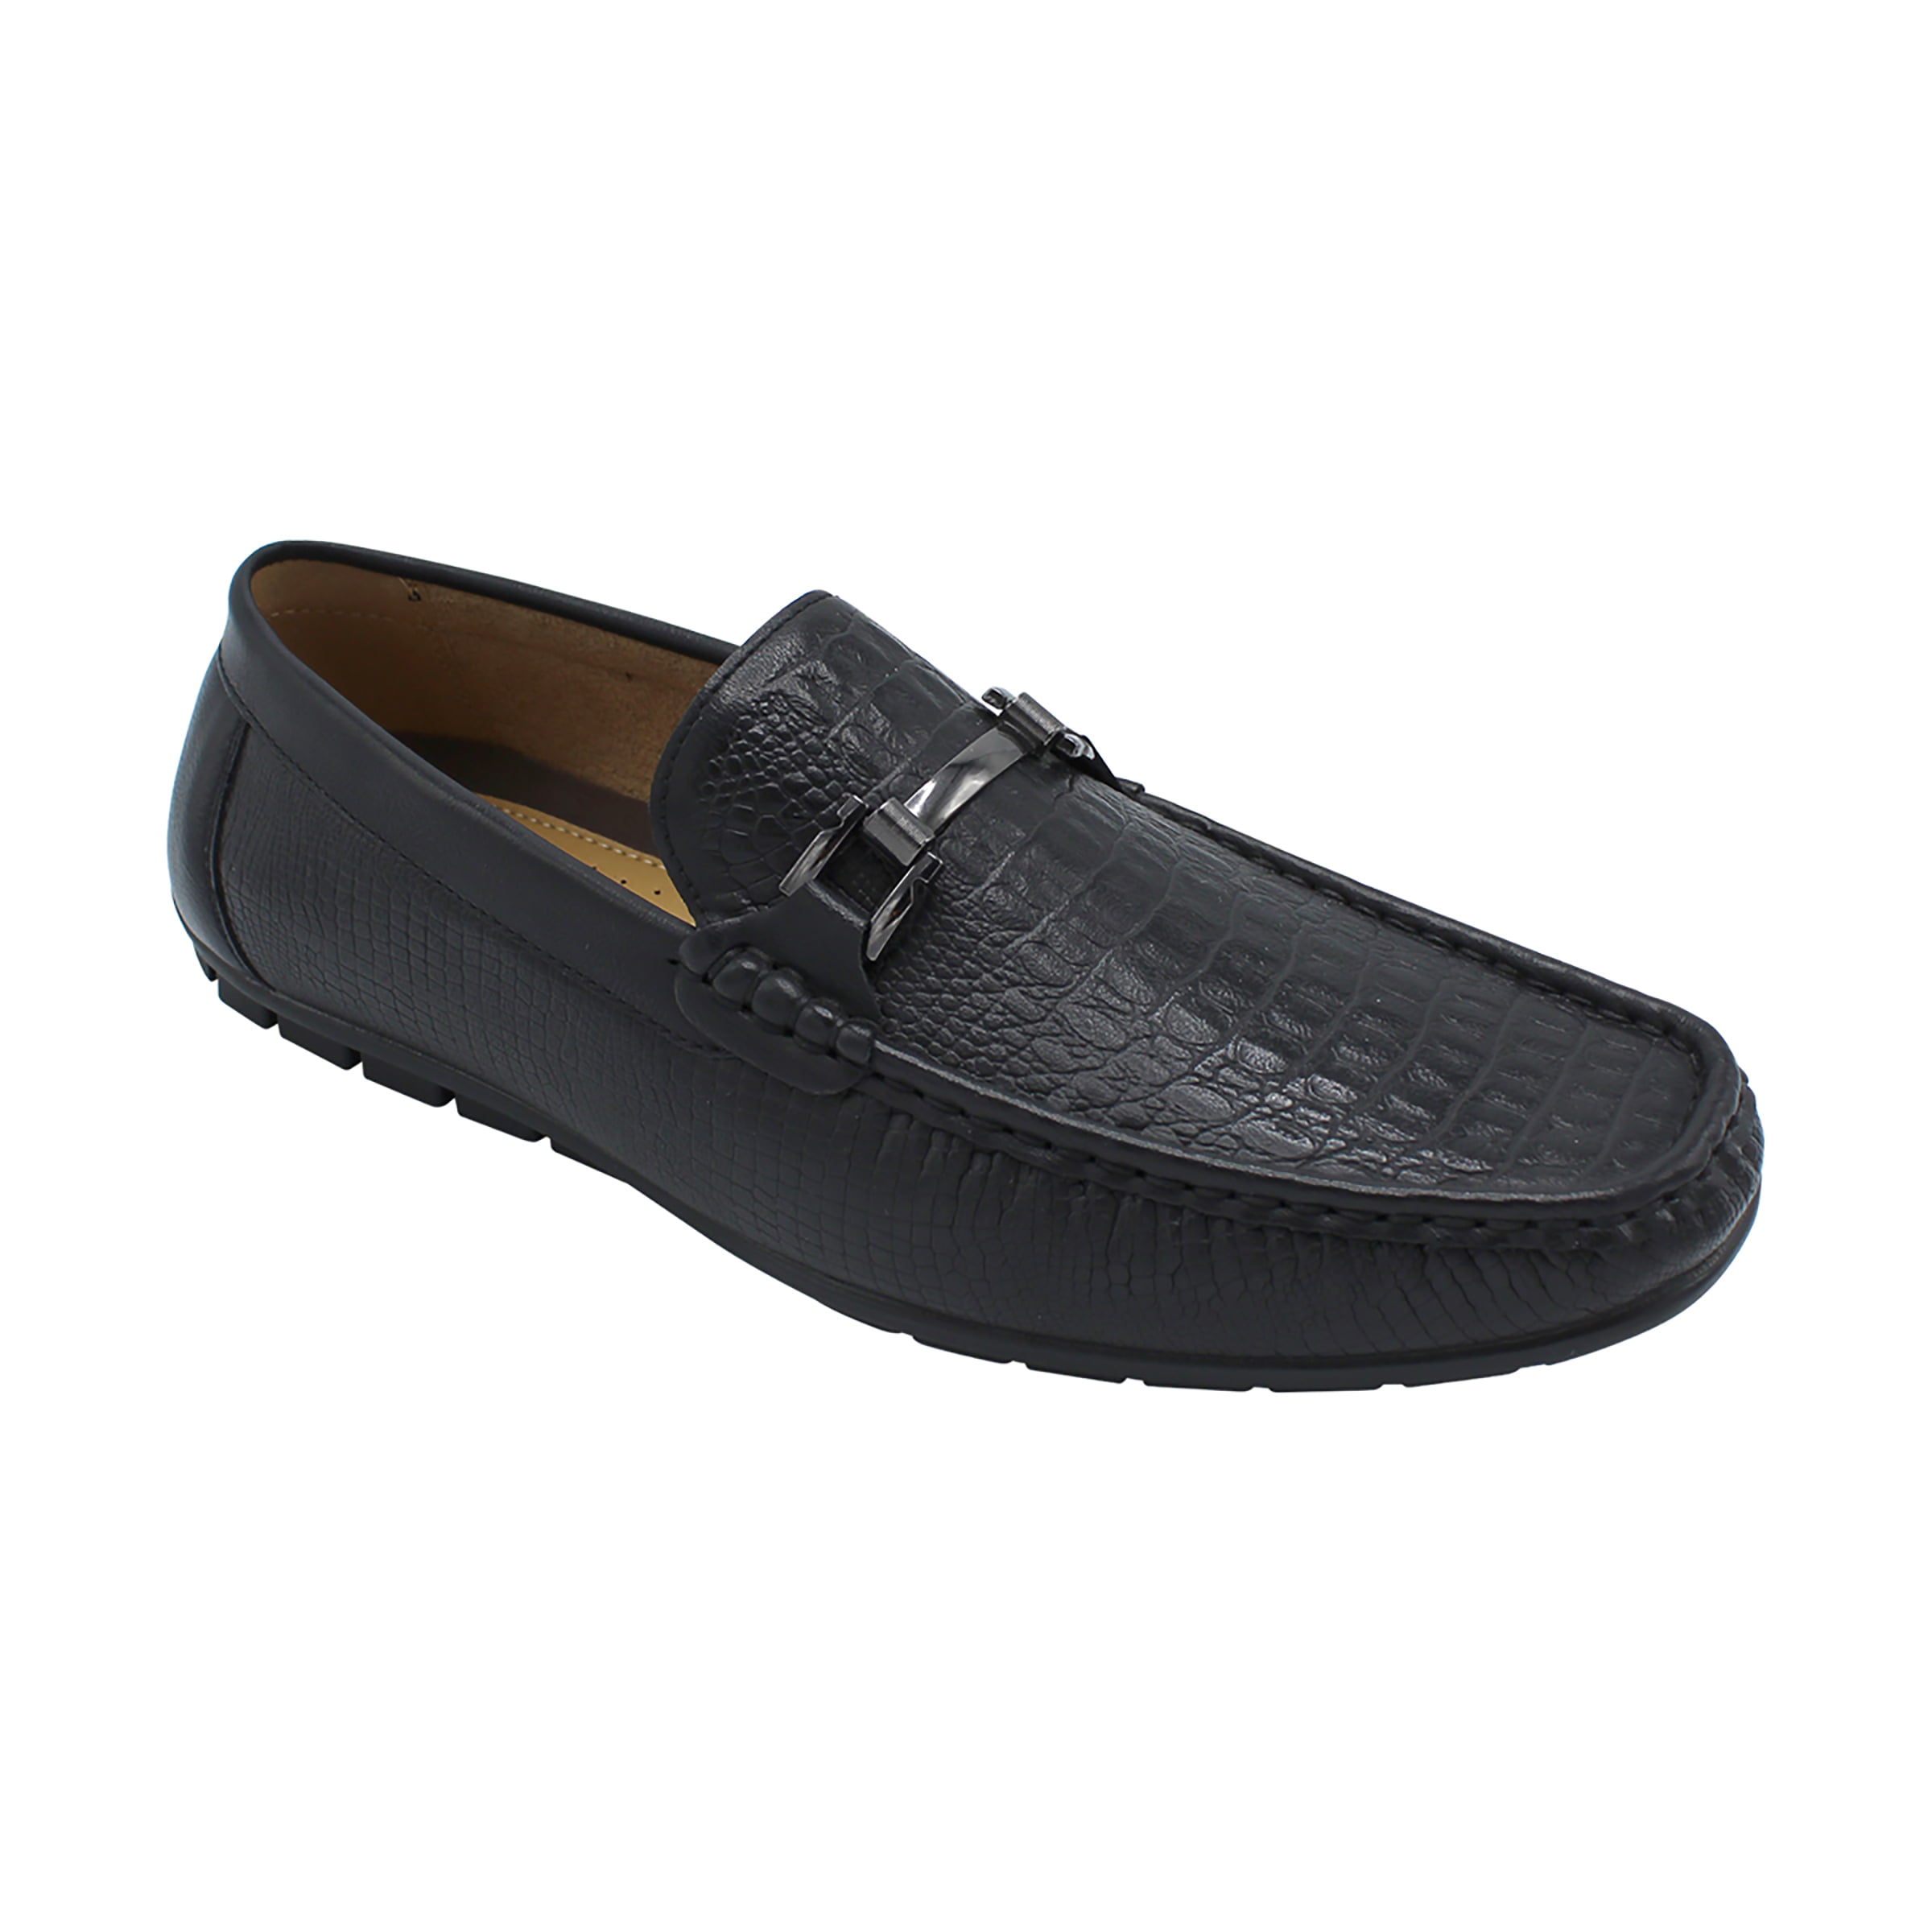 Mario Lopez - Men’s Loafers Dress Casual Loafers for Men Slip-on ...